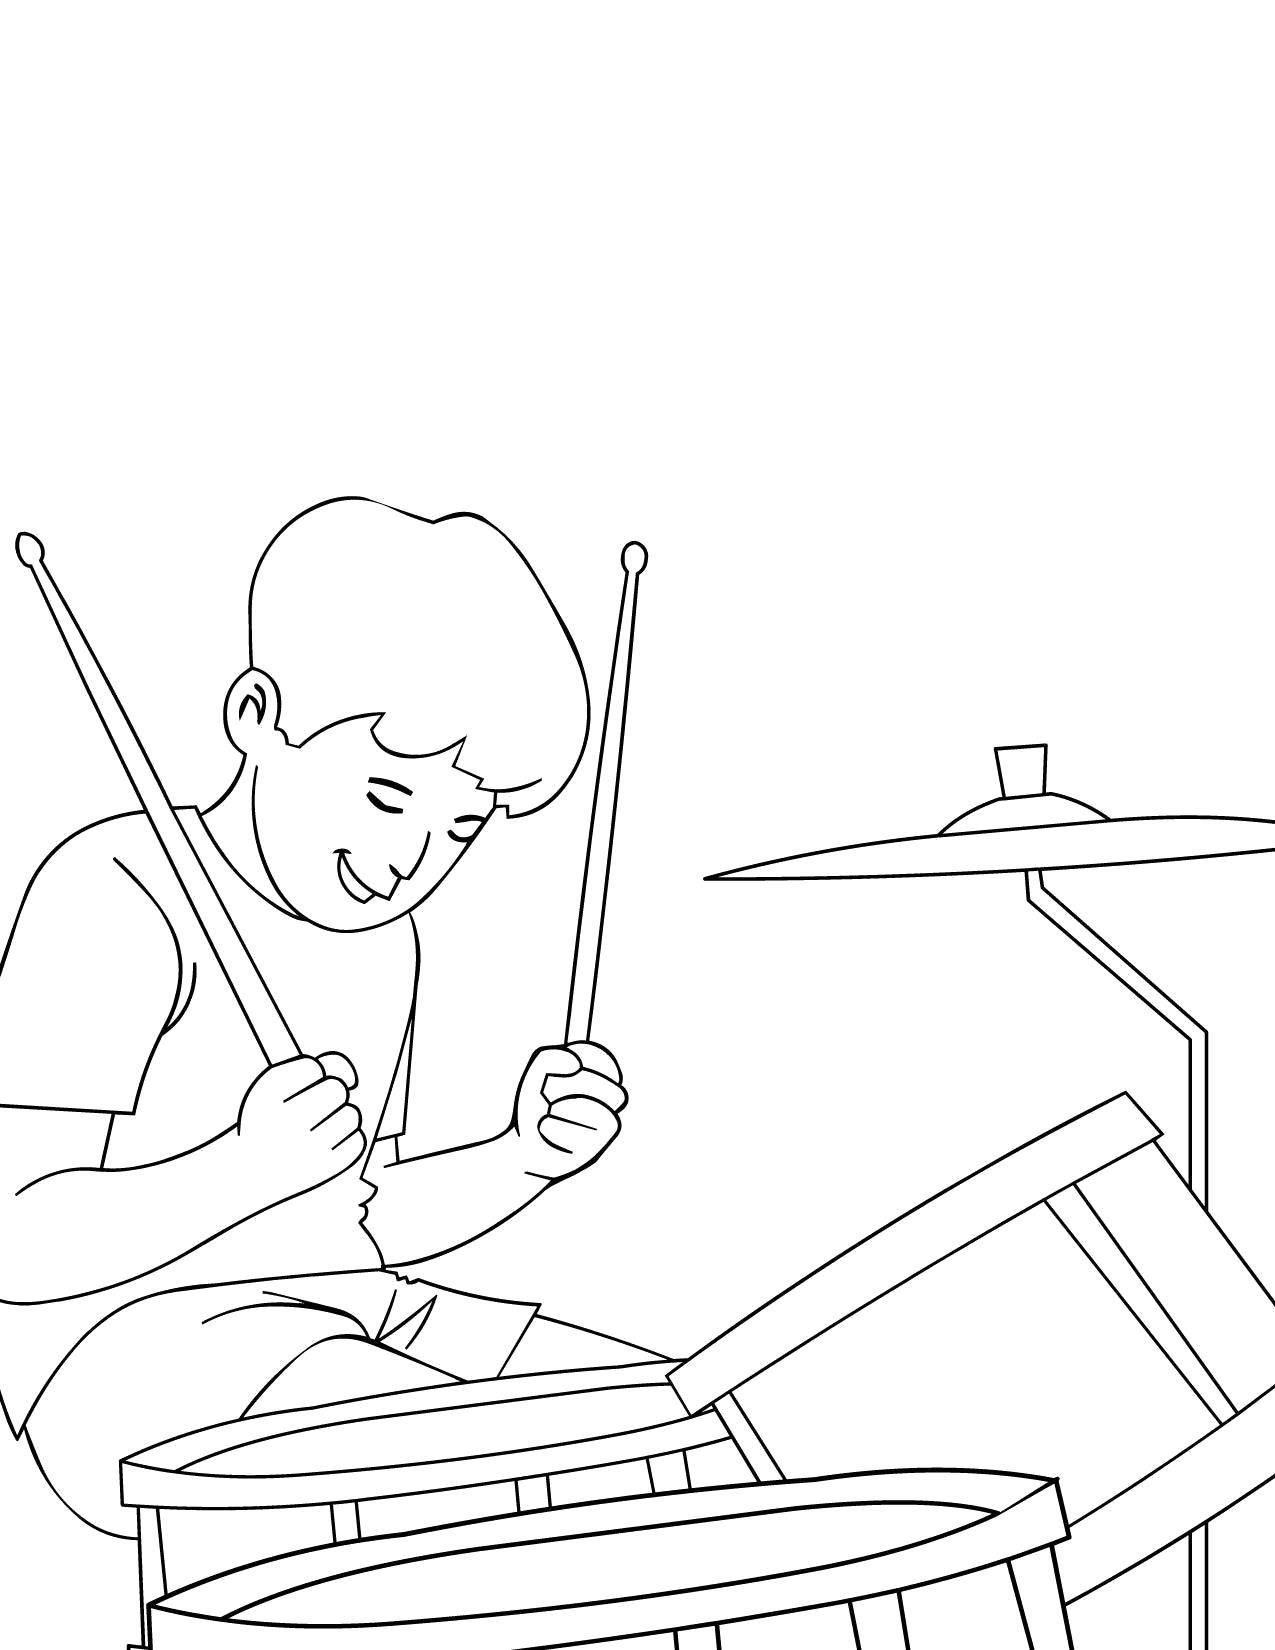 Coloring Young drummer. Category Music. Tags:  Music, instrument, musician, note.